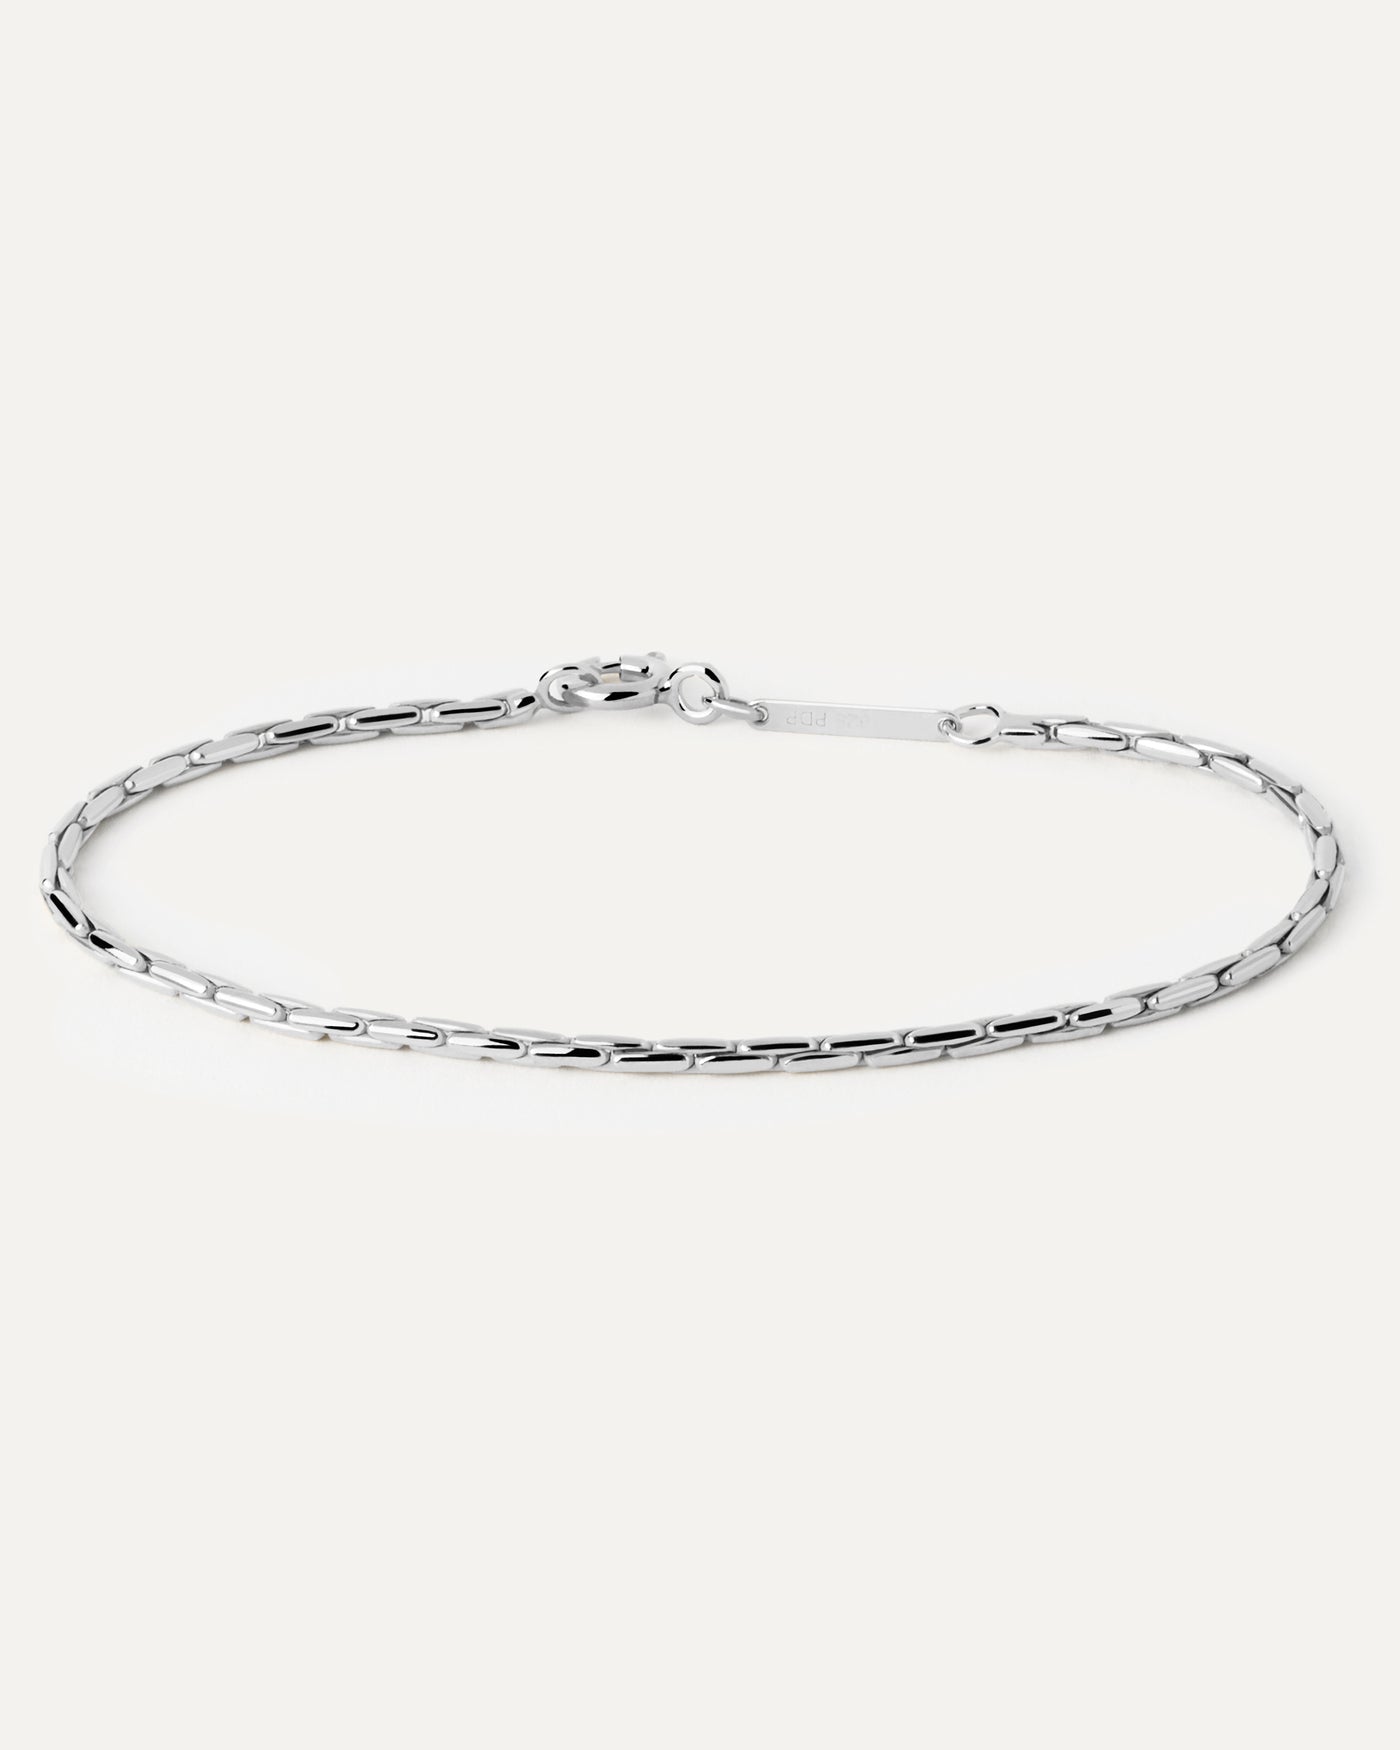 2023 Selection | Boston  Silver Chain Bracelet. Boston silver chain bracelet with elongated links. Get the latest arrival from PDPAOLA. Place your order safely and get this Best Seller. Free Shipping.